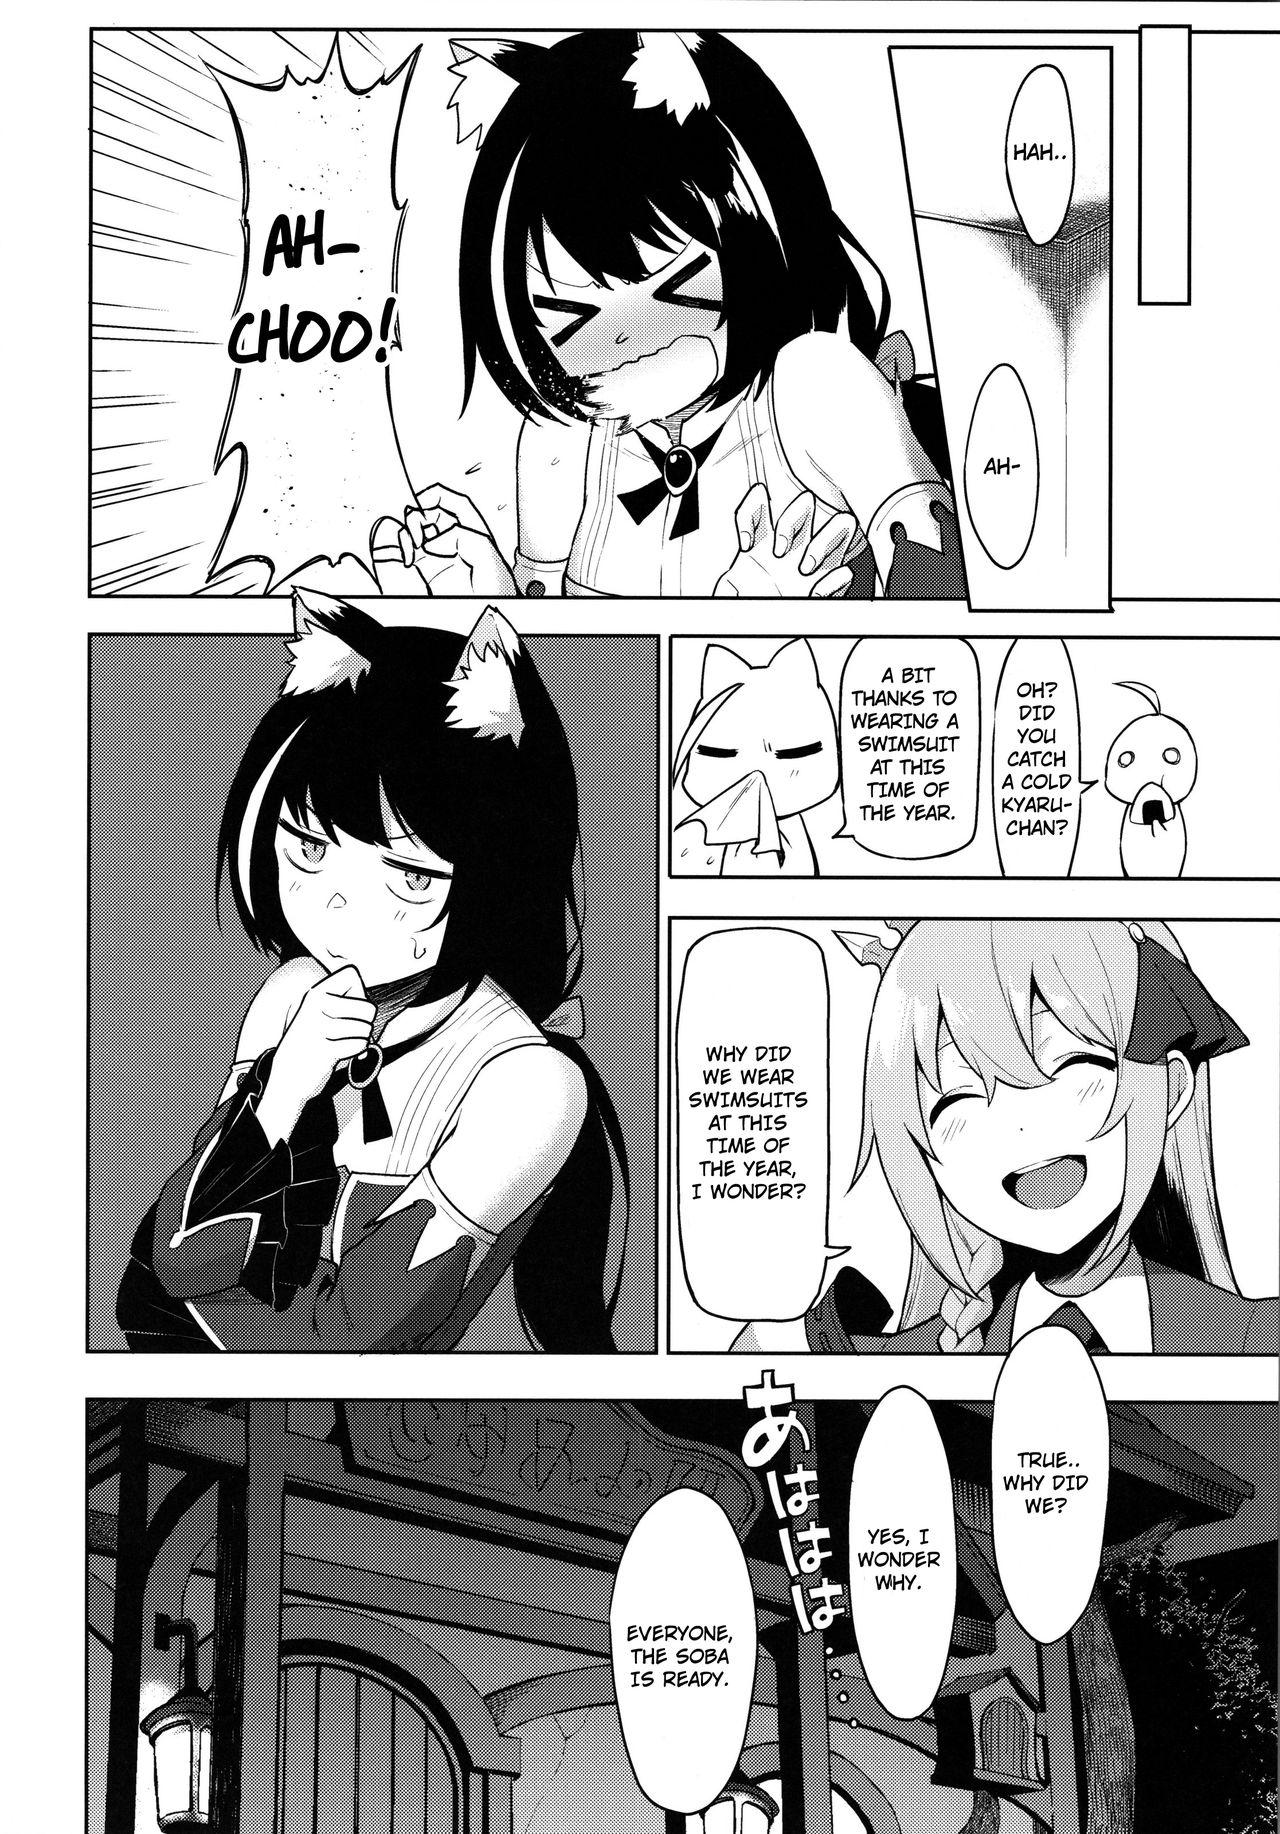 Cum Princess to Connect Shitai! ReDive! | I want to connect with a princess! ReDive! - Princess connect Crazy - Page 25